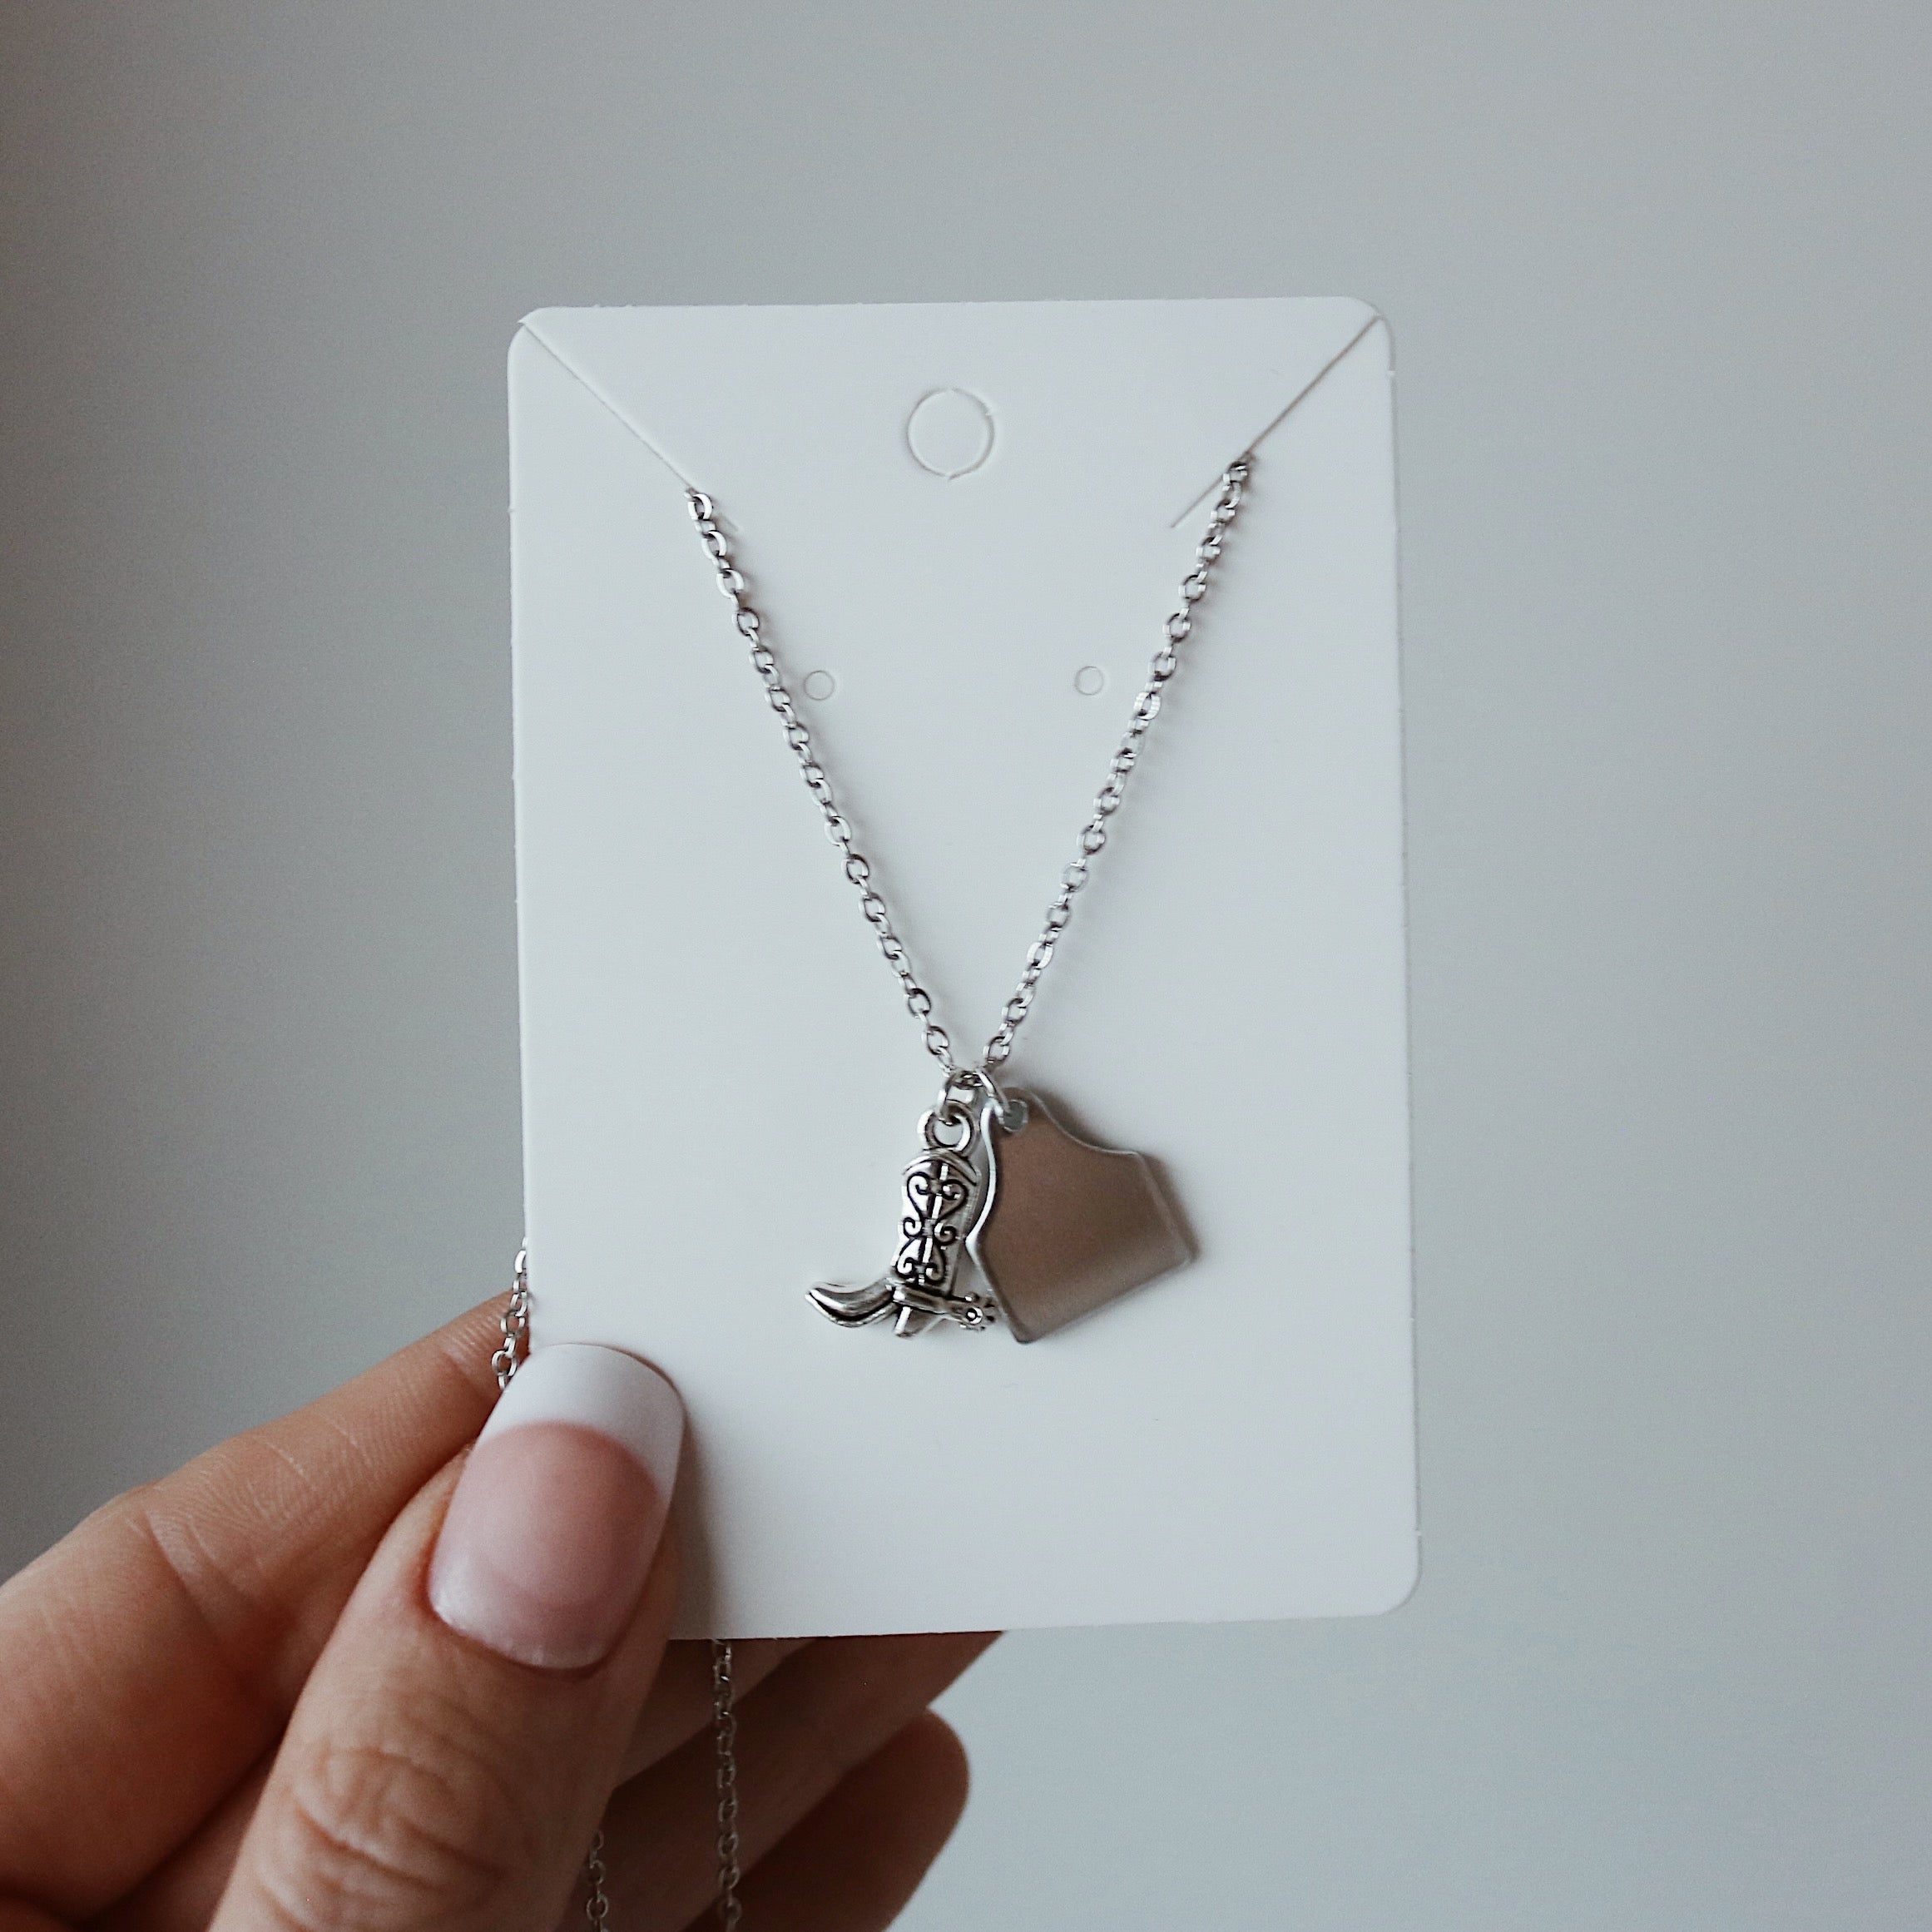 Custom Made Necklace Pendants & Charms | Hyo Silver